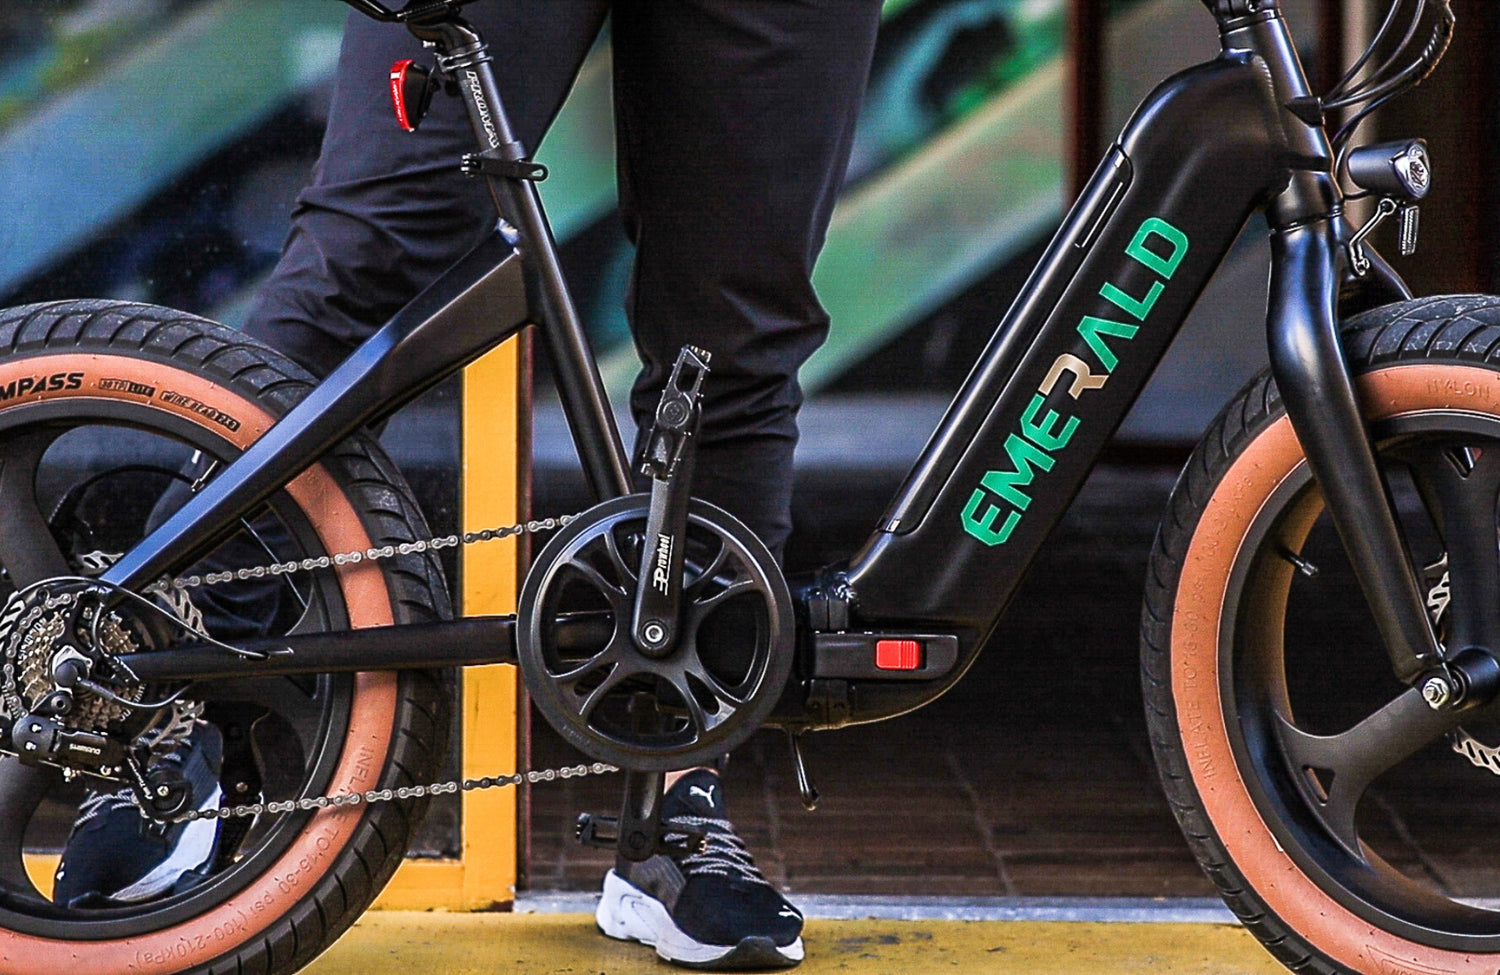 Someone about to ride an Emerald eBike